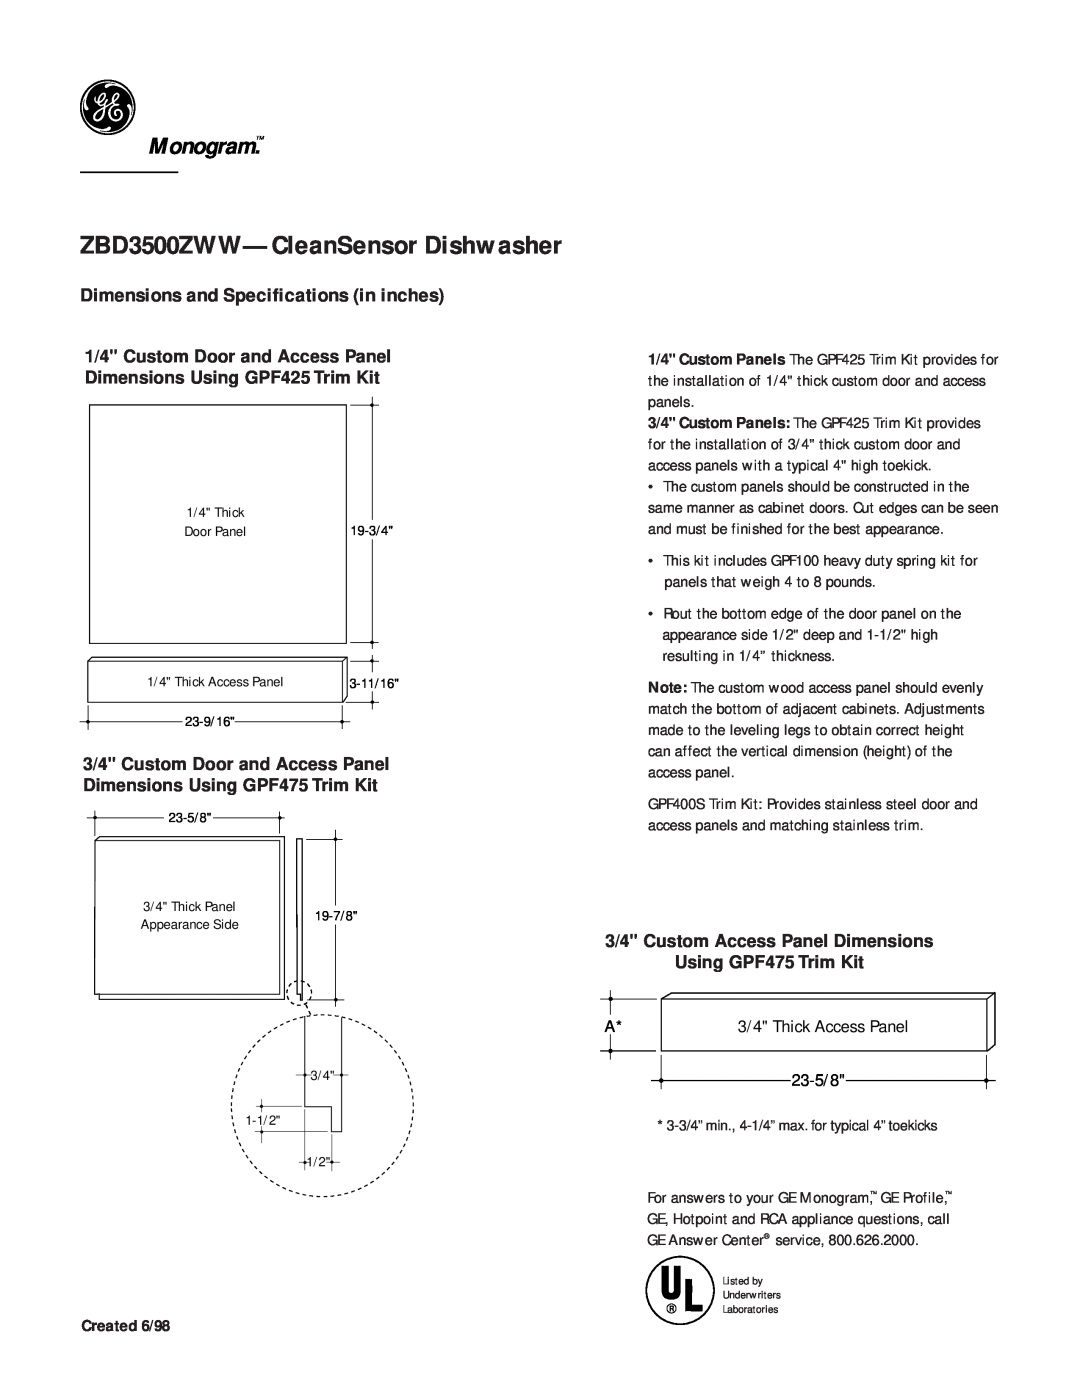 GE Monogram ZBD3500ZWW-CleanSensorDishwasher, Monogram, Dimensions and Specifications in inches, 23-5/8, Created 6/98 